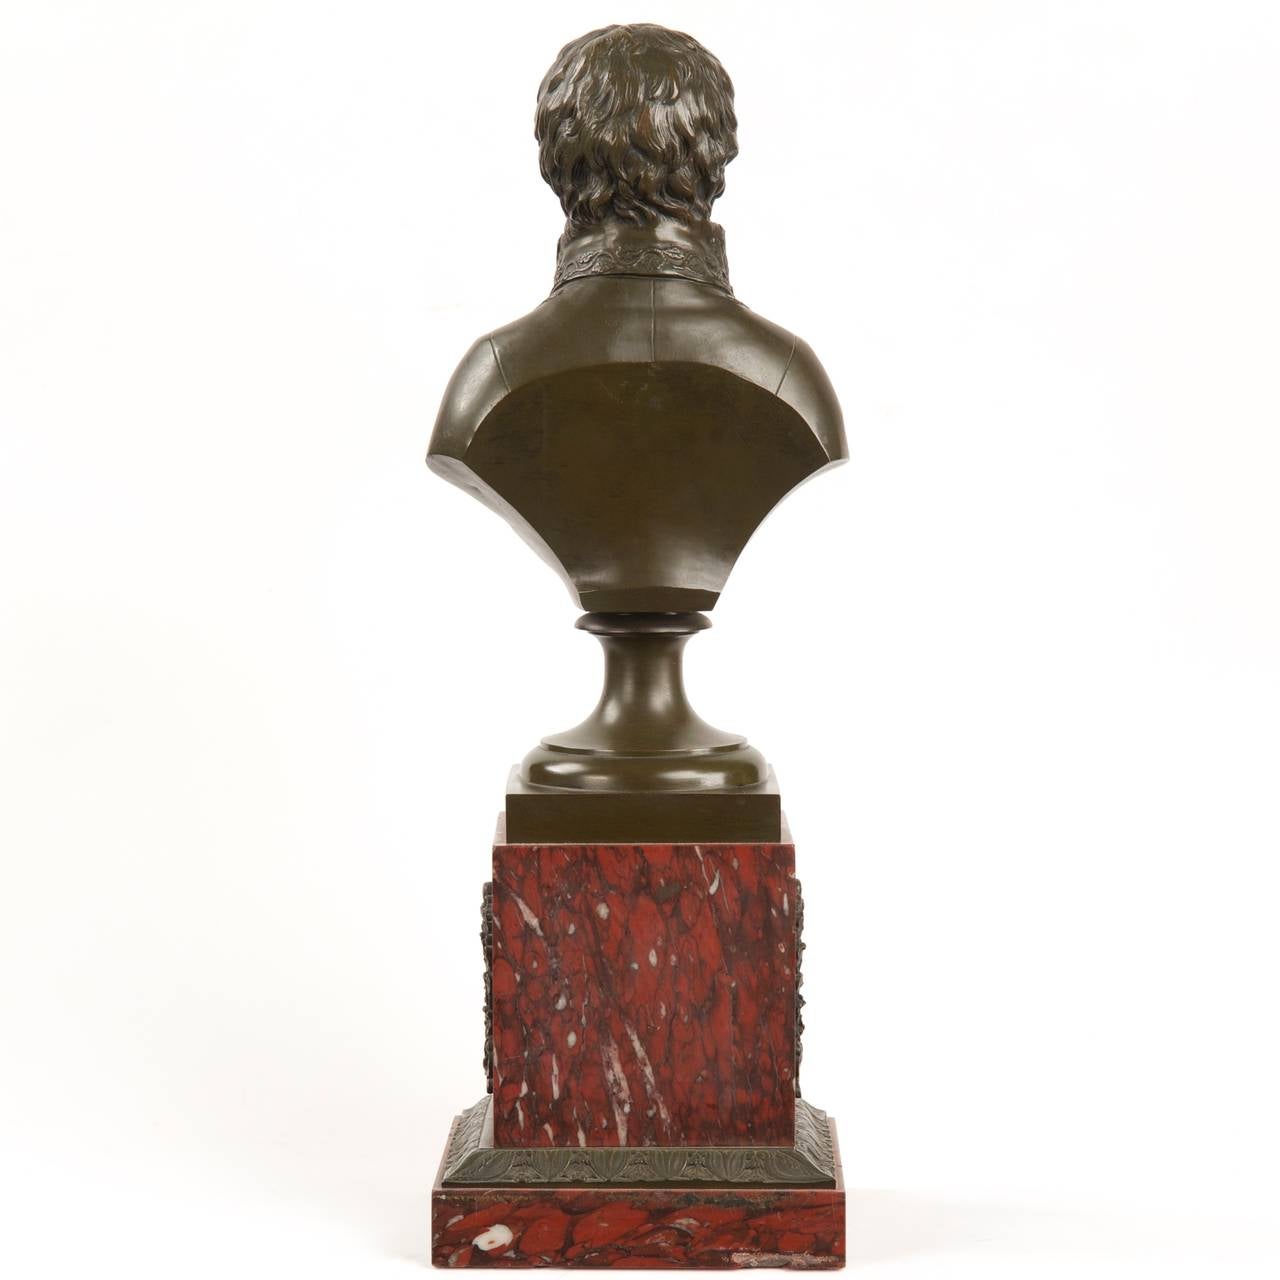 Romantic Patinated French Bronze Bust Sculpture of Napoleon as First Consul, 19th Century